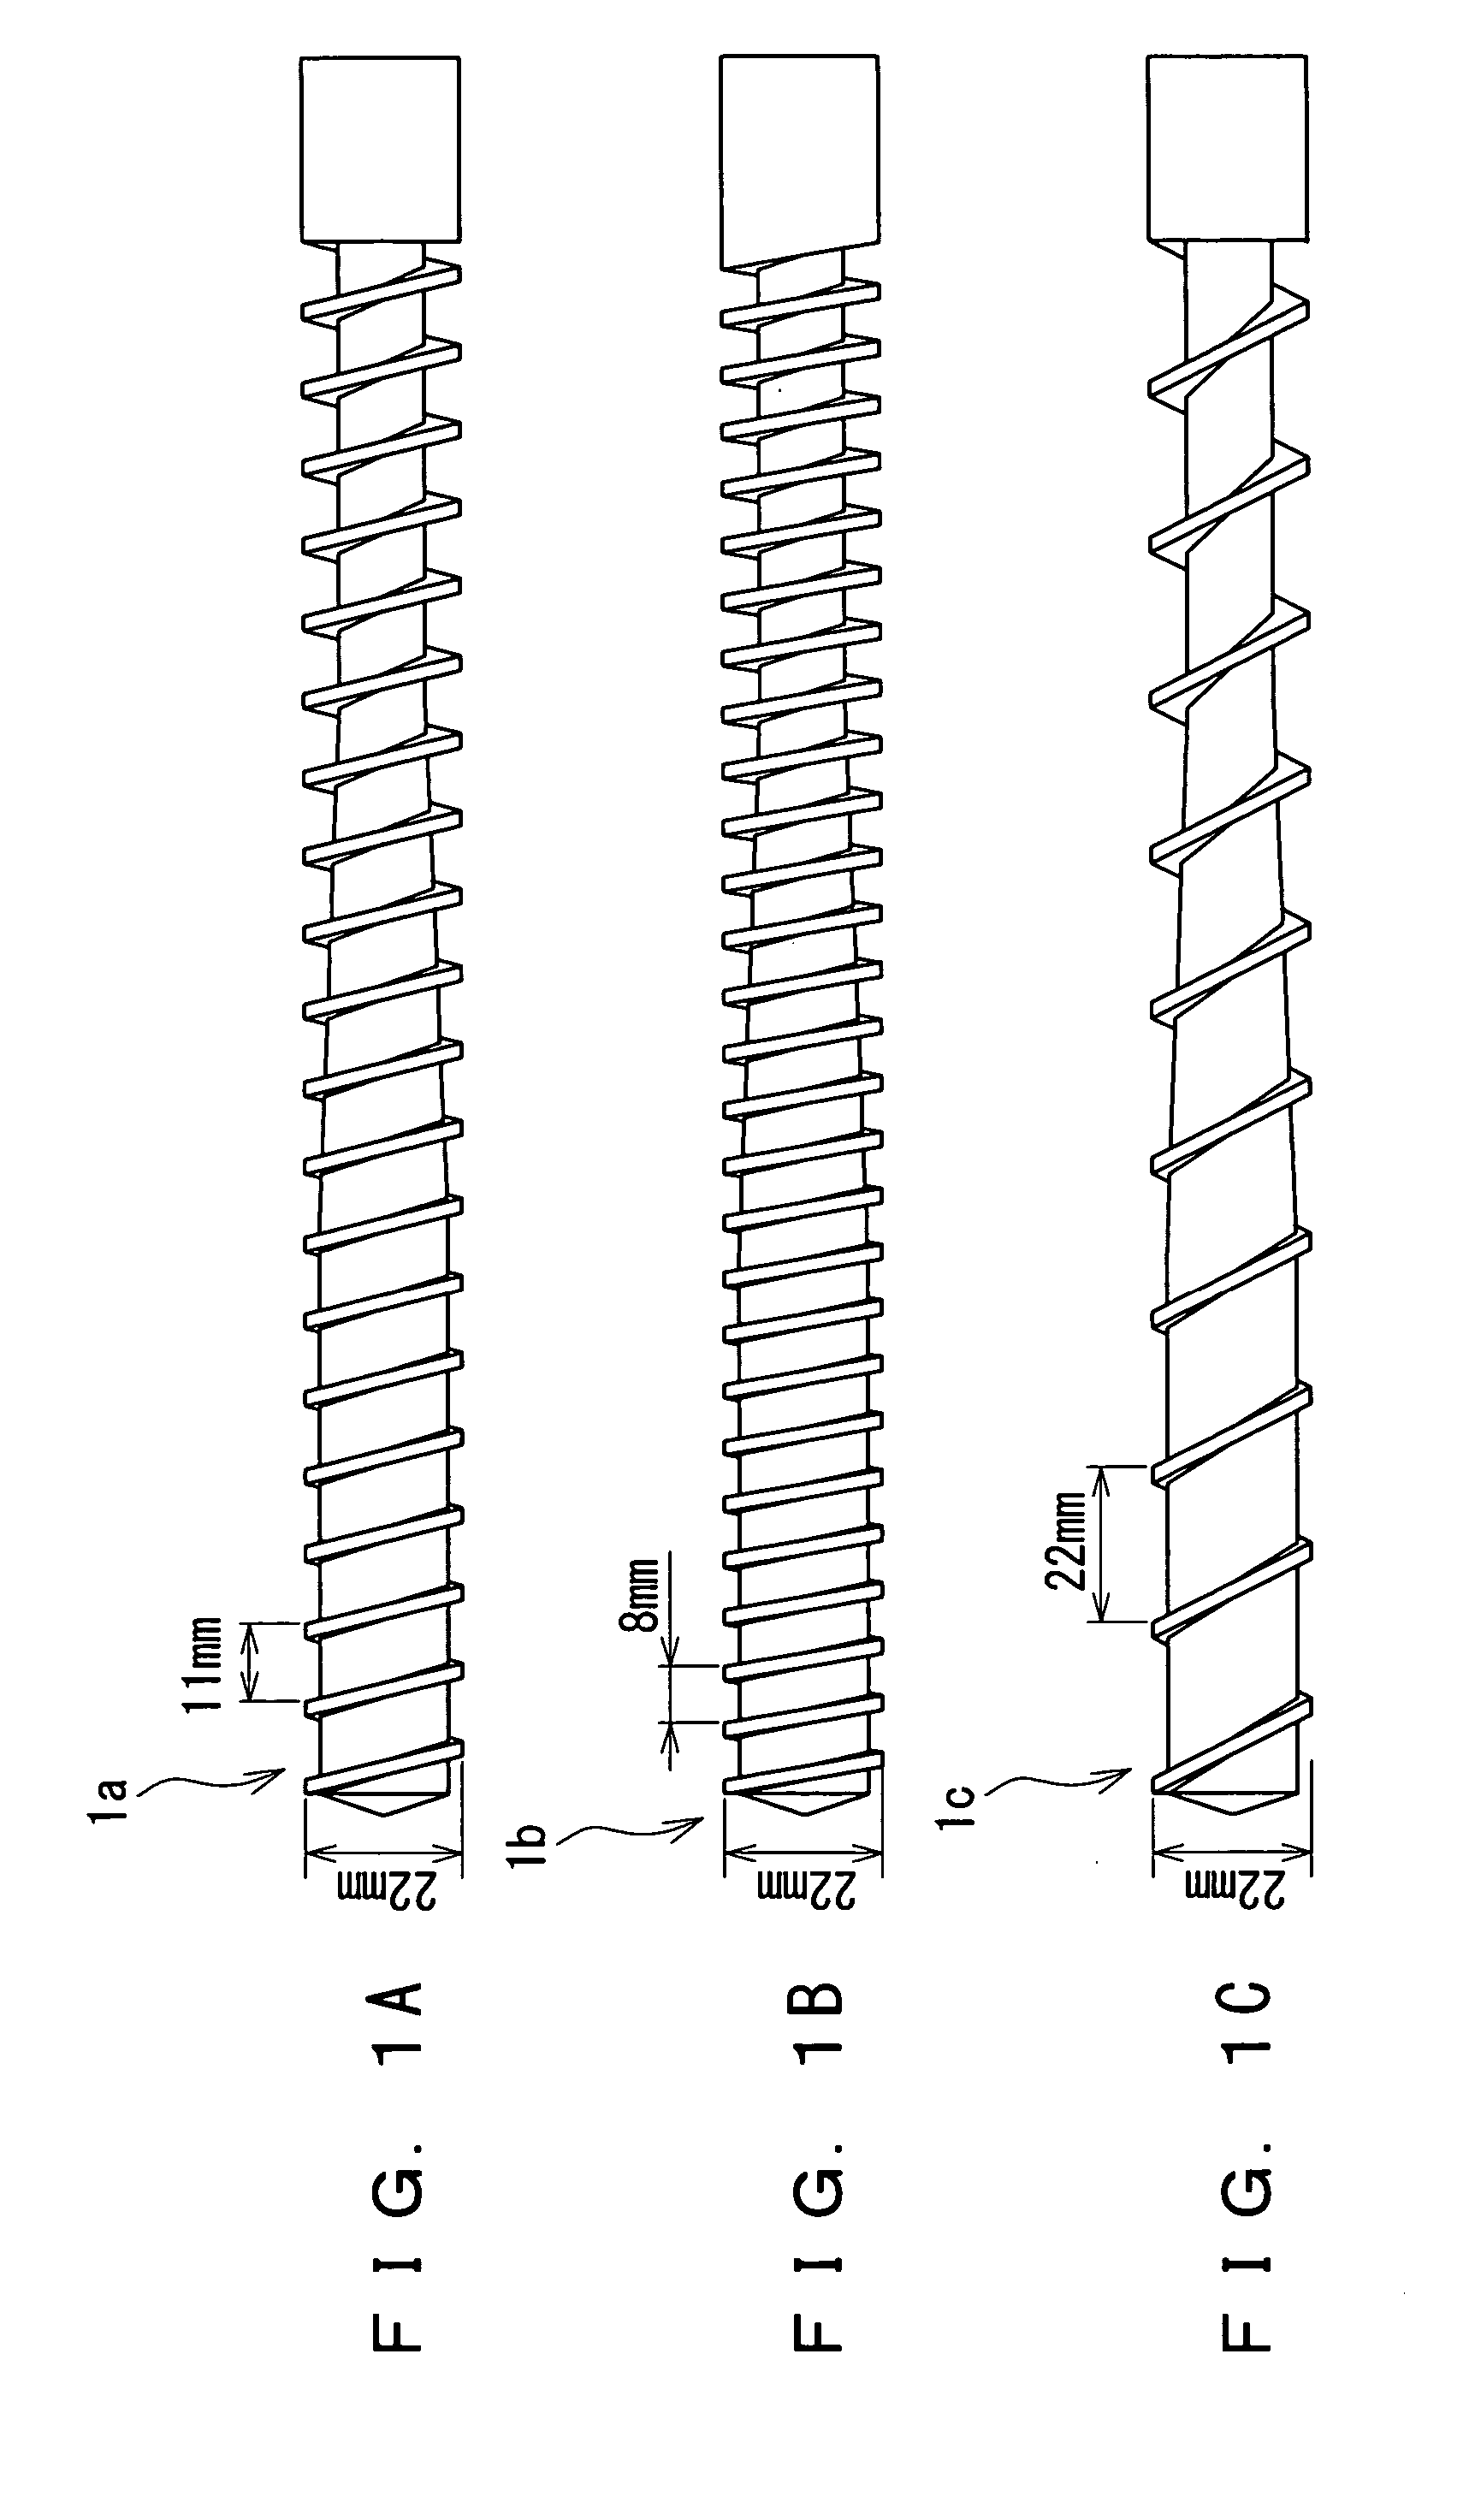 Screw for plastication of resin material and a plasticizing mechanism